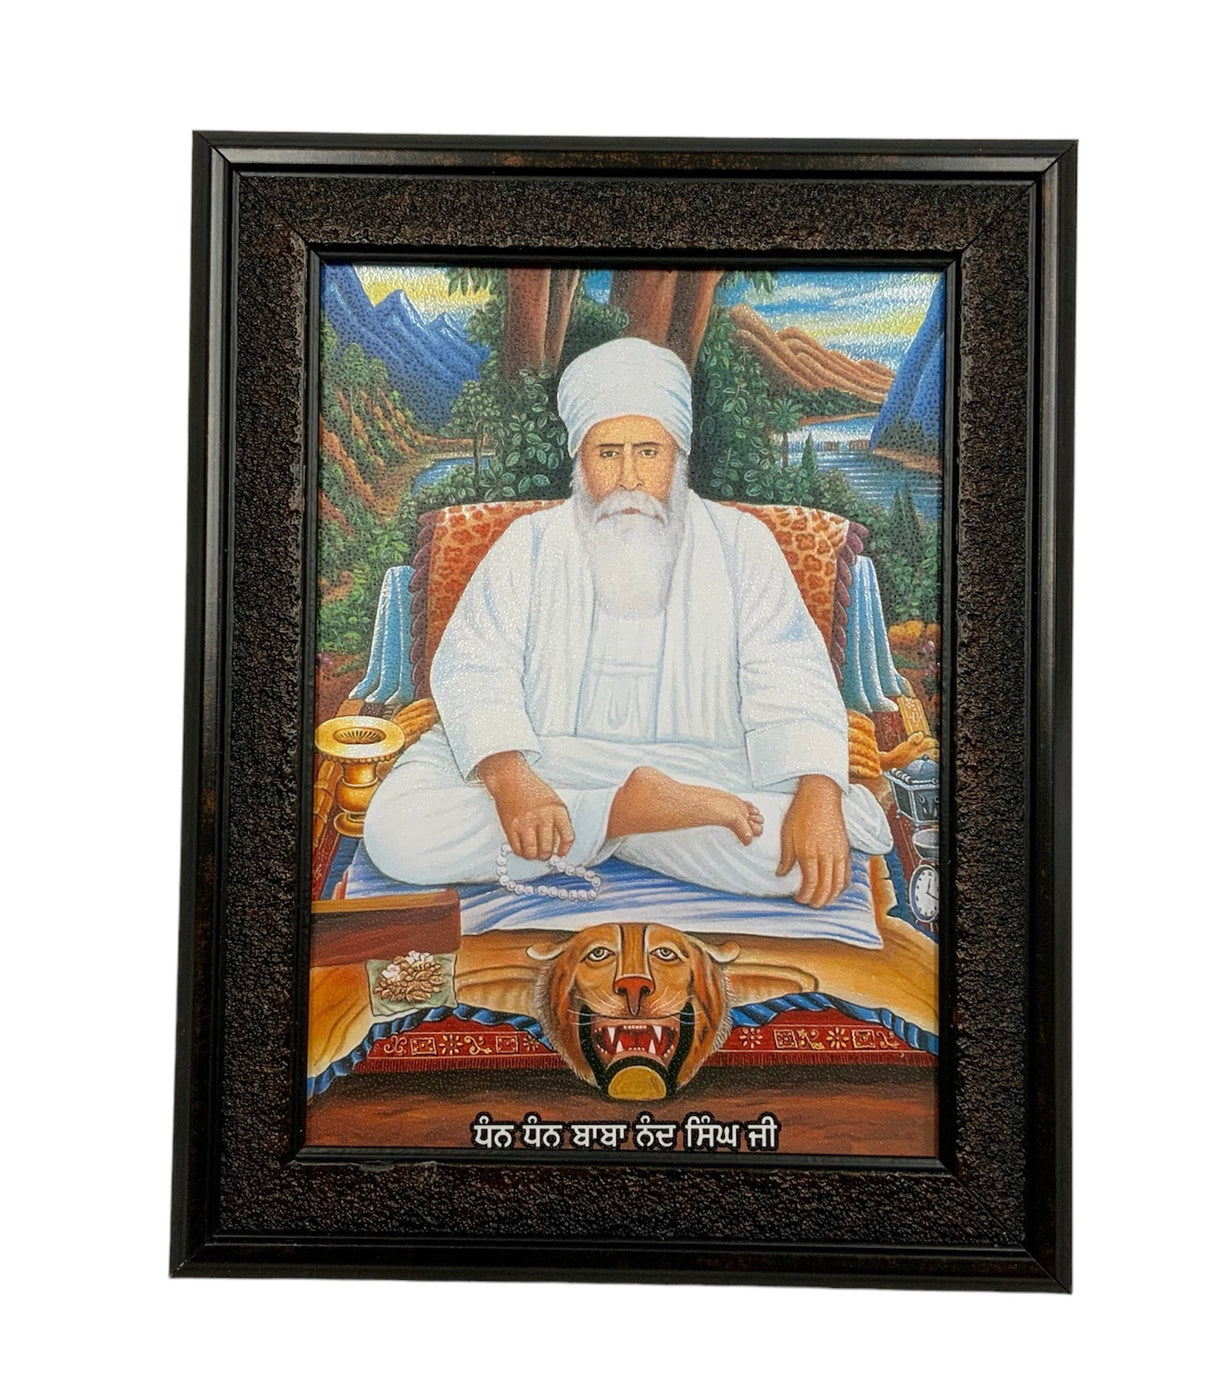 Baba Nand Singh Ji Photo 7X9 inches with Stand